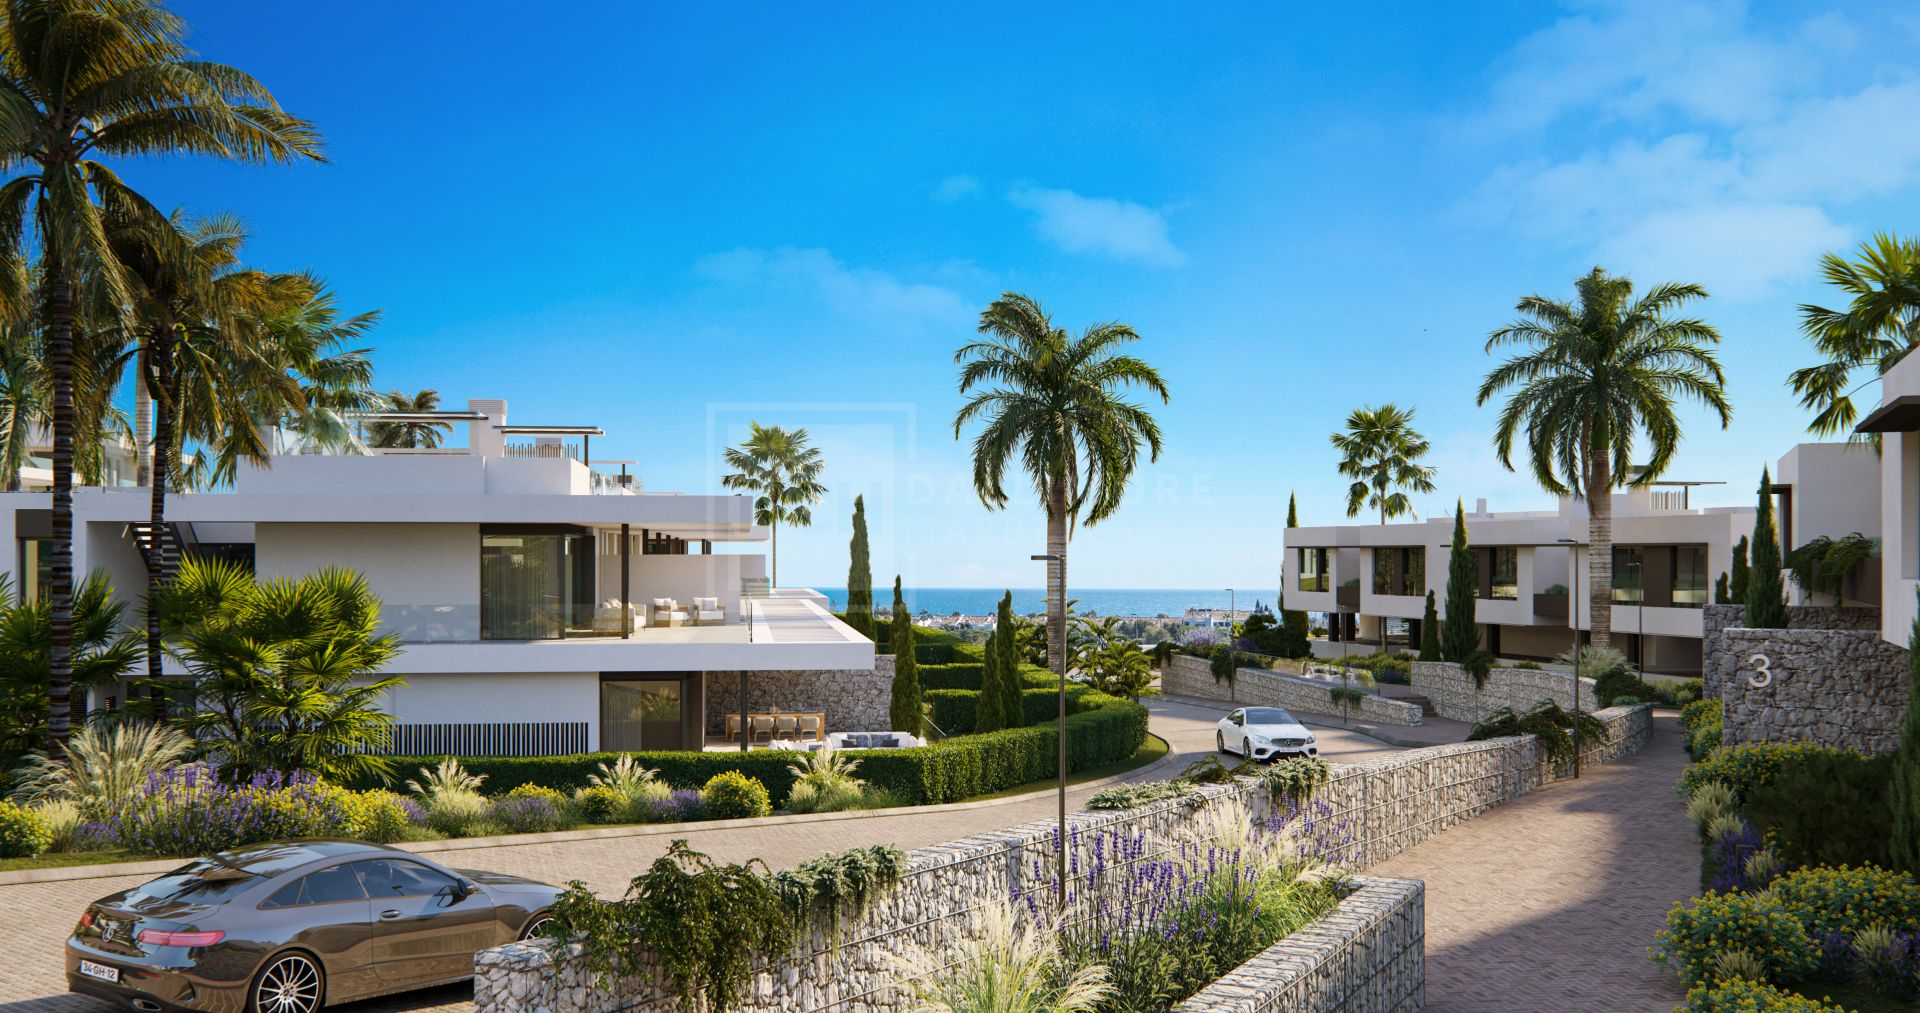 STUNNING BRAND NEW 4-BEDROOM CONTEMPORARY SEMI-DETACHED VILLA WITH SEA VIEWS EAST OF MARBELLA